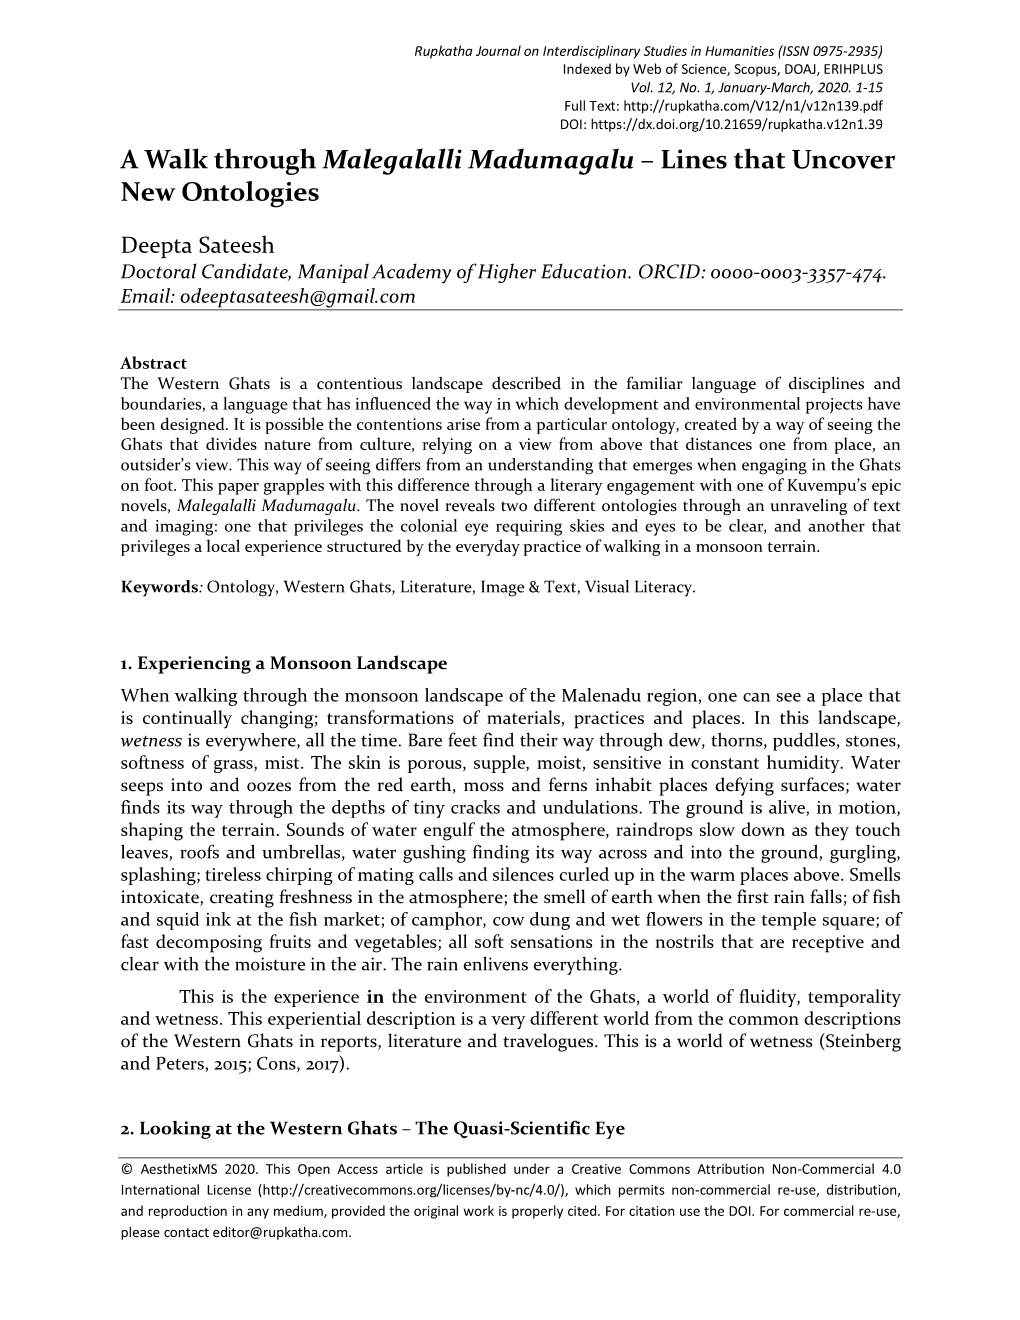 A Walk Through Malegalalli Madumagalu – Lines That Uncover New Ontologies